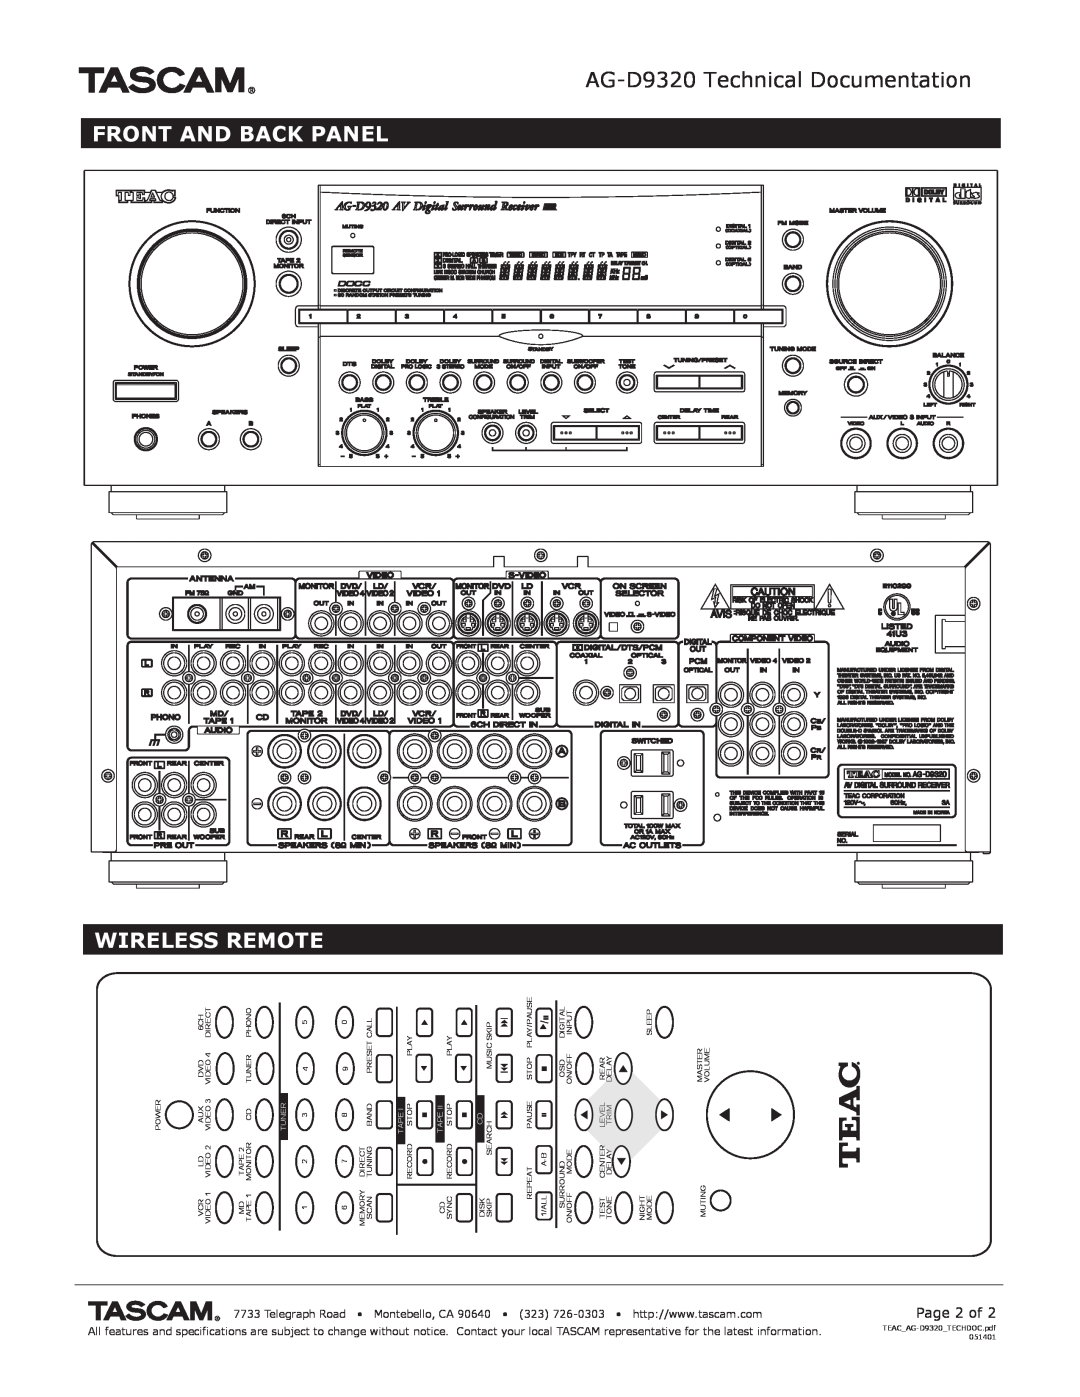 Tascam specifications AG-D9320Technical Documentation, Front And Back Panel Wireless Remote 